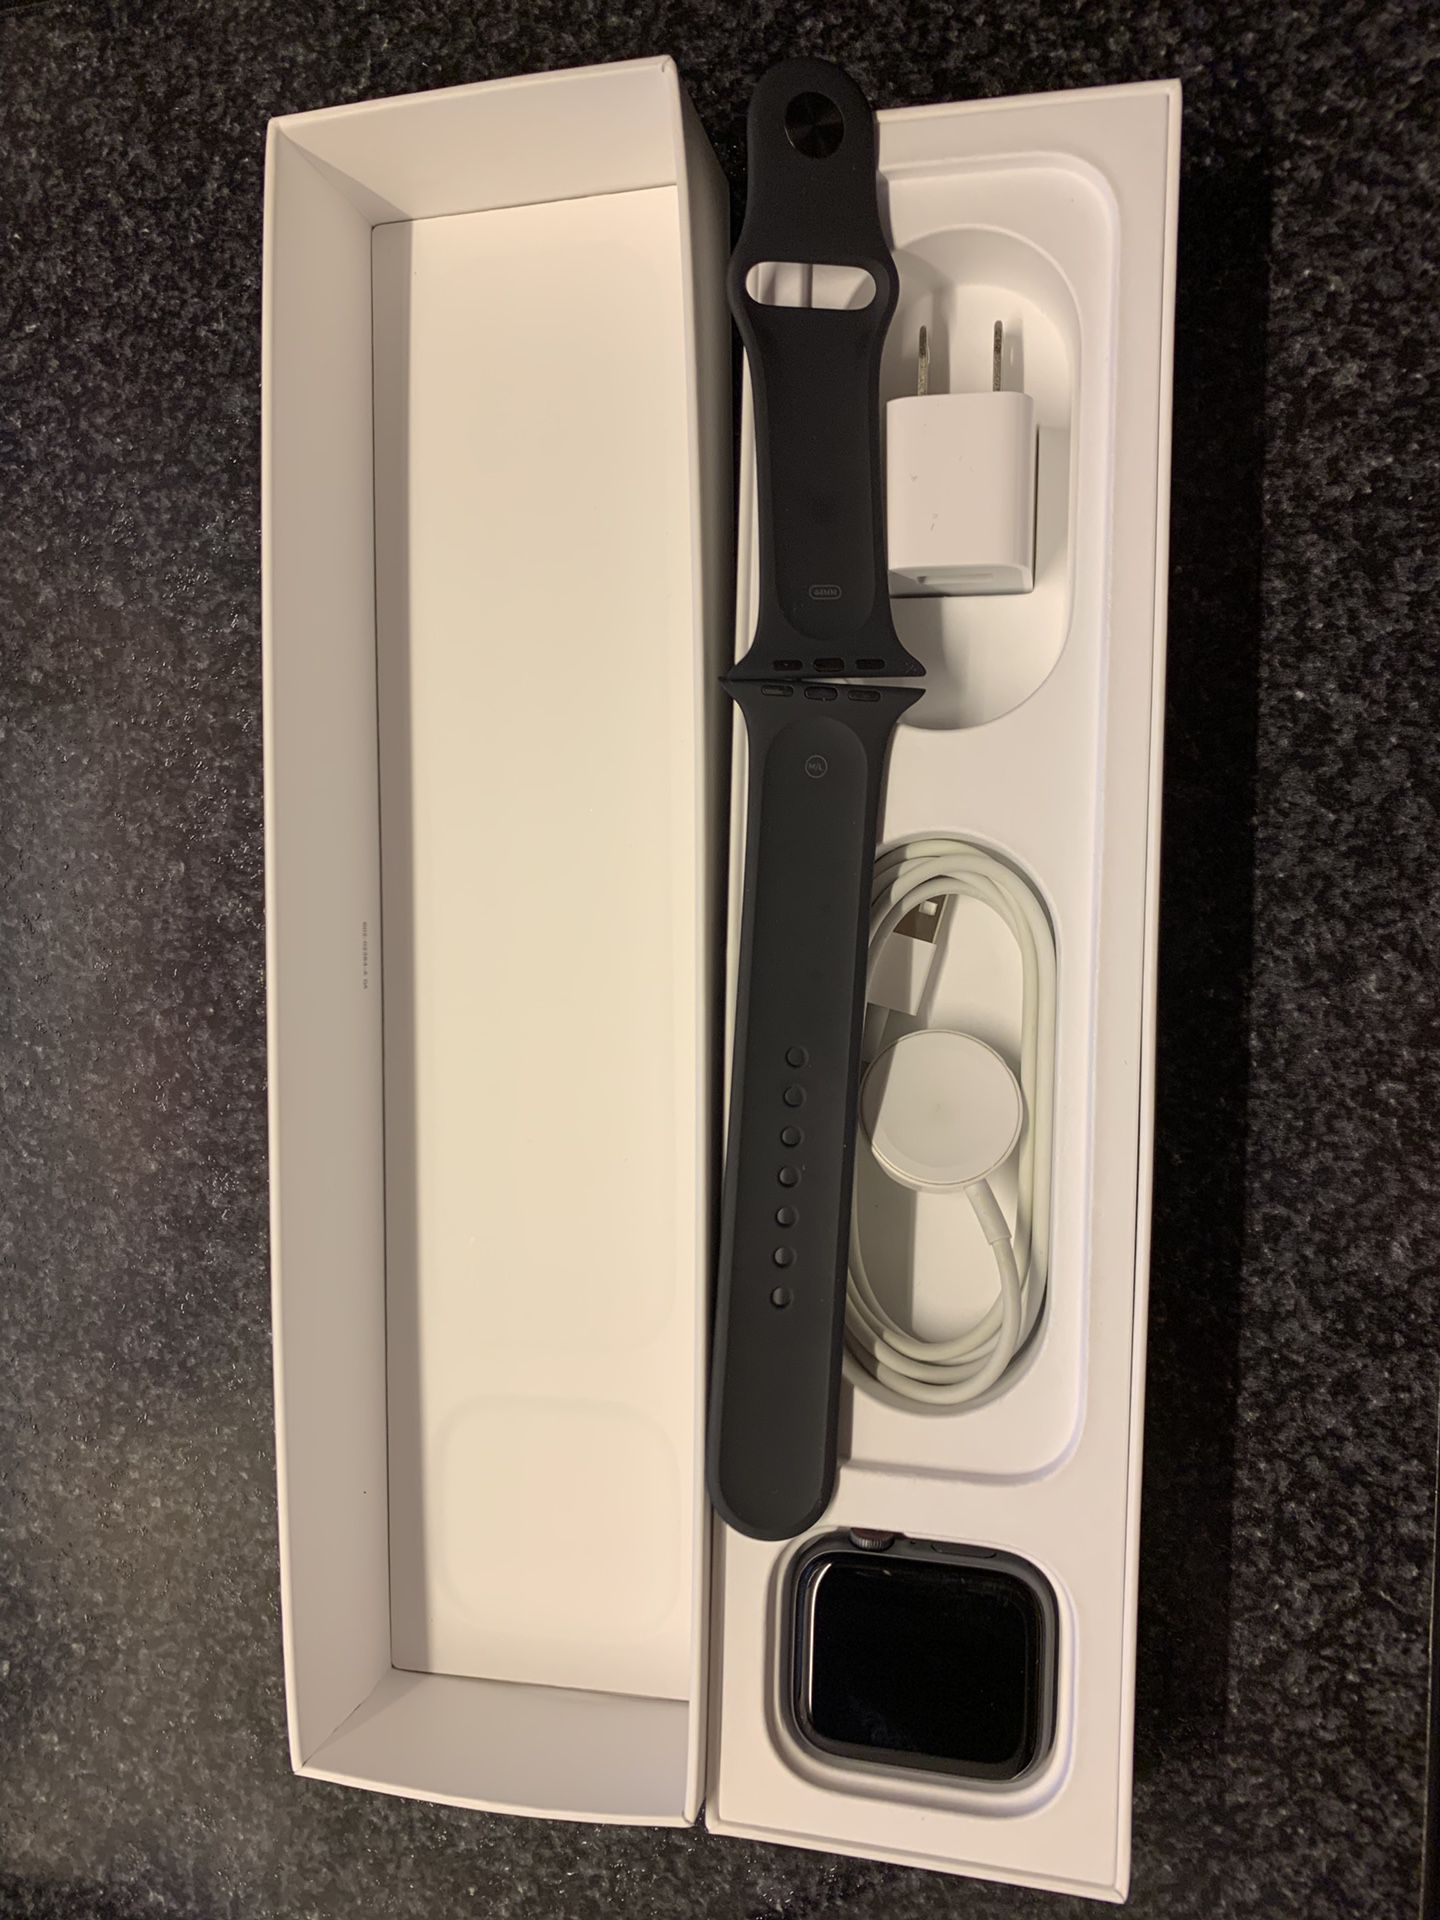 Apple watch 4, 44mm space gray, Gps + Cellular